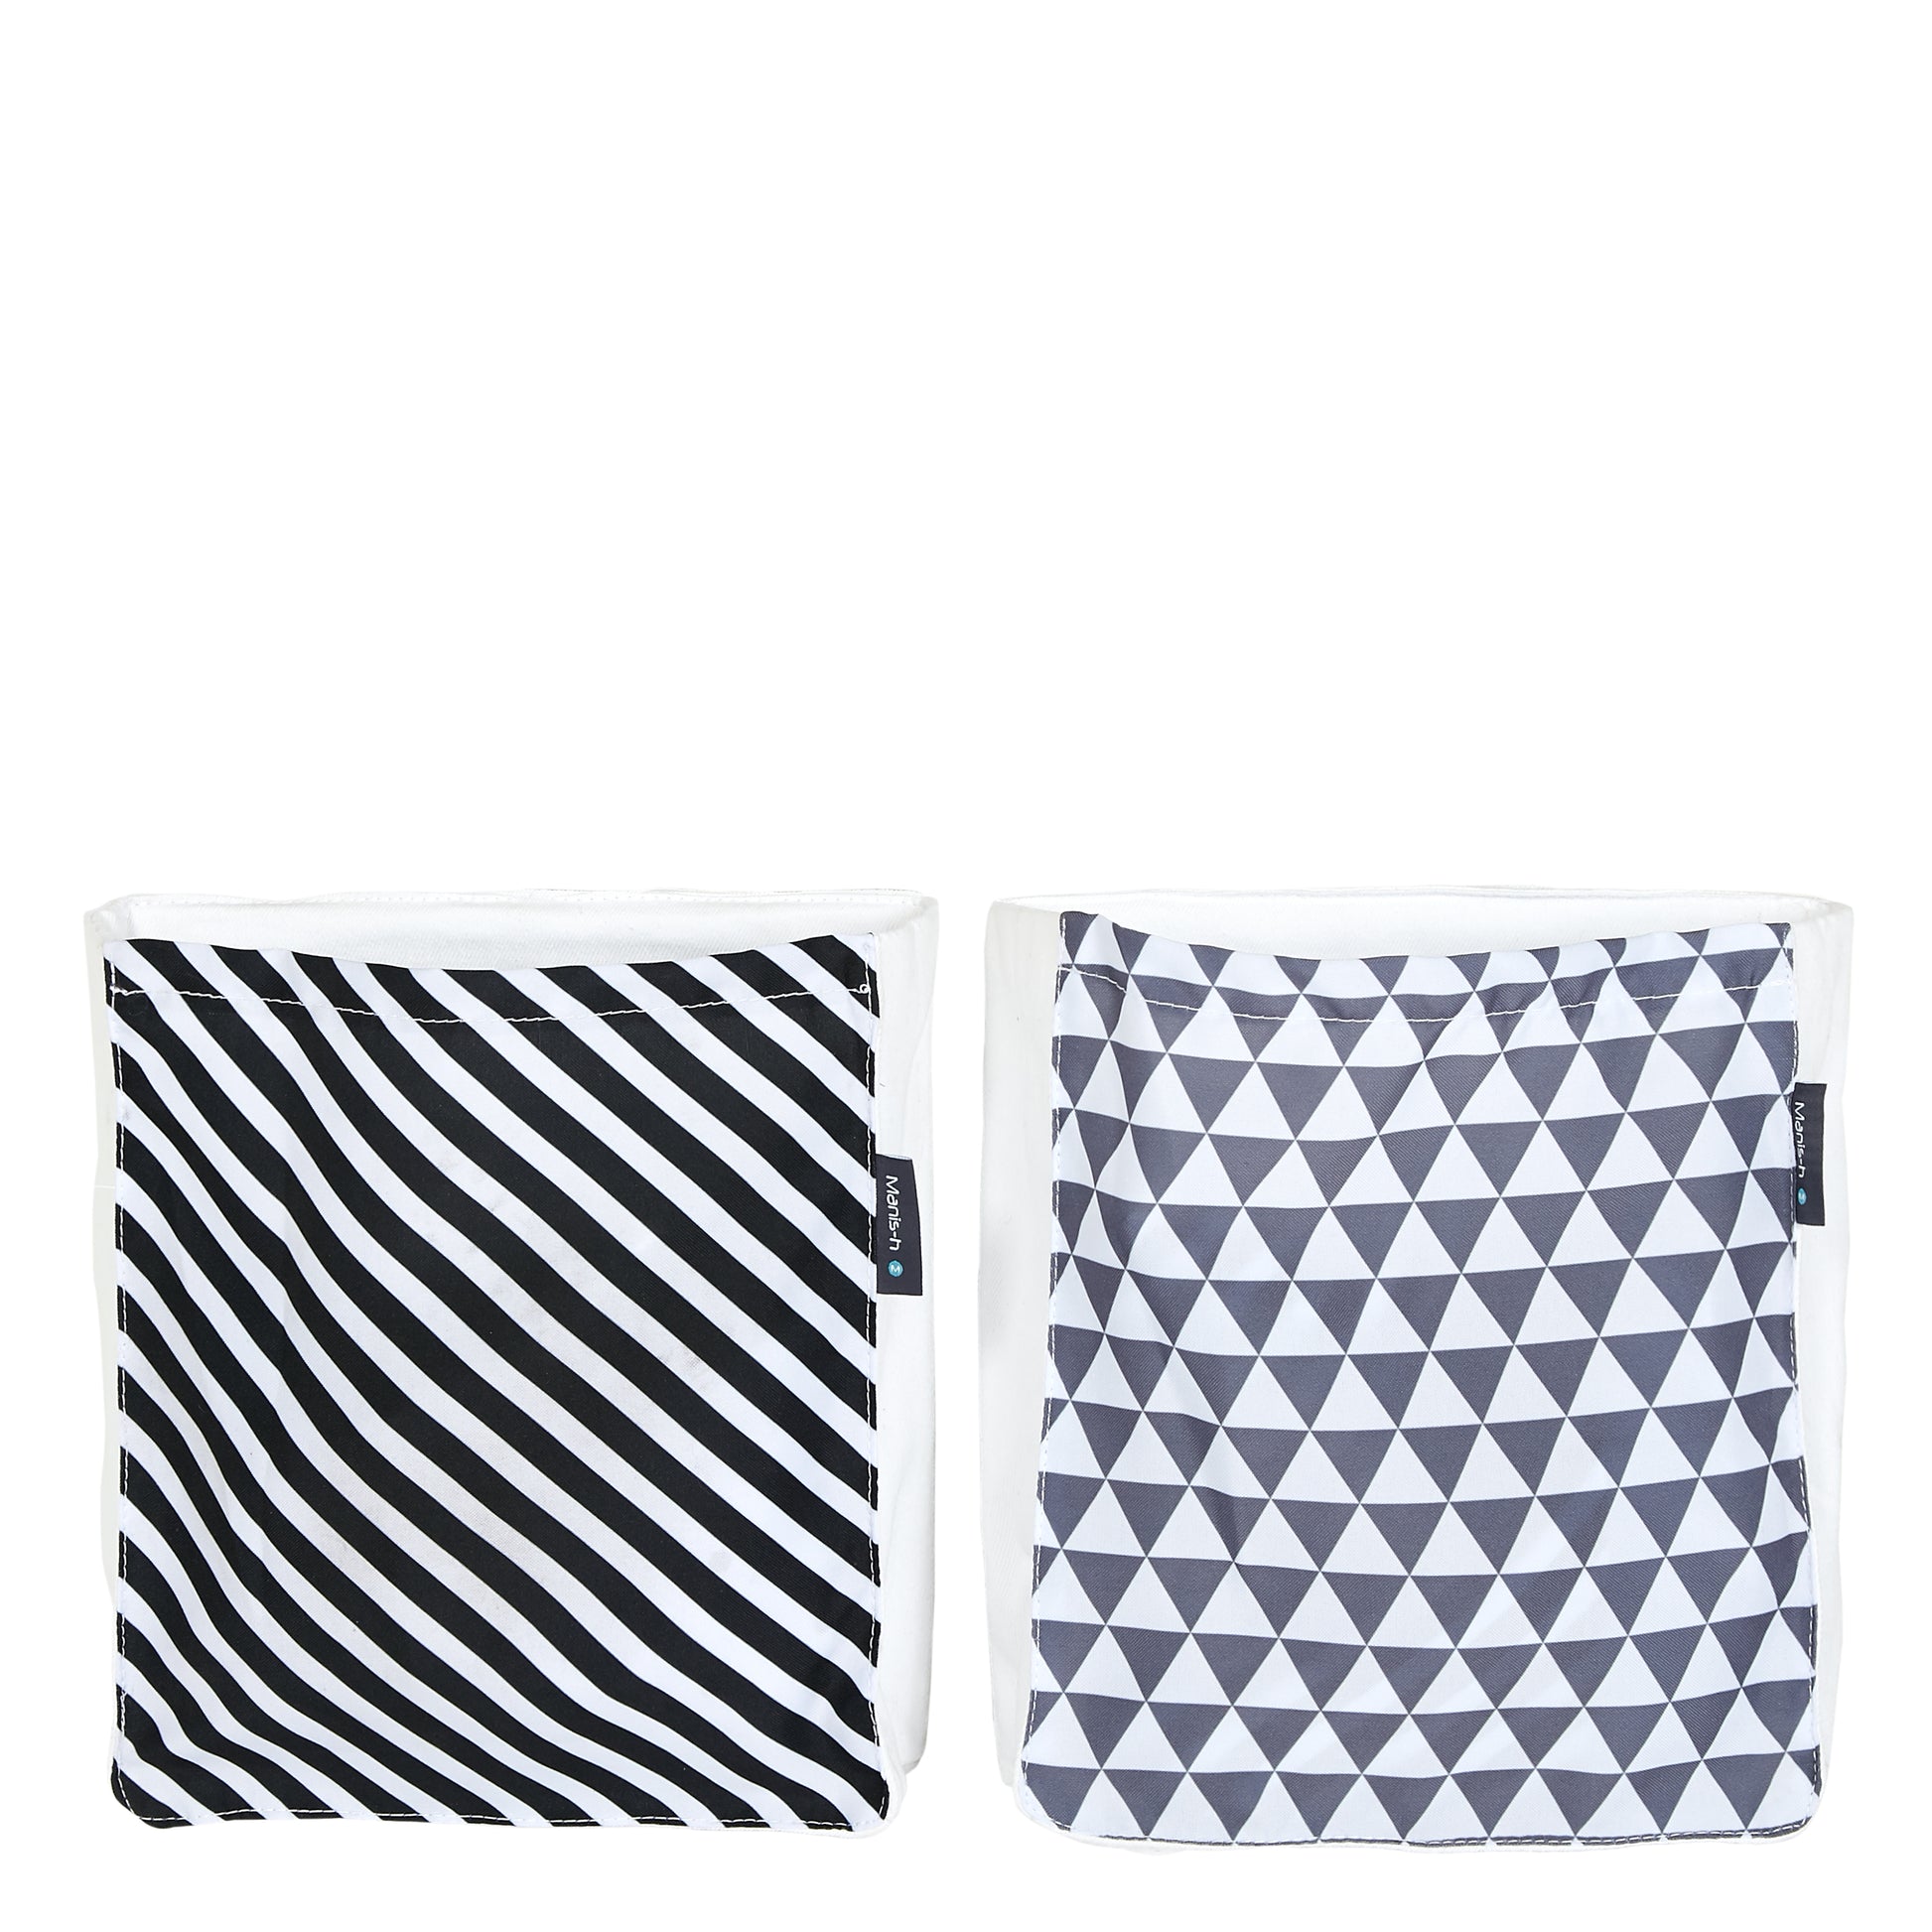 Manis-h  2 Bed Pockets in a Stripe and Triangle Design